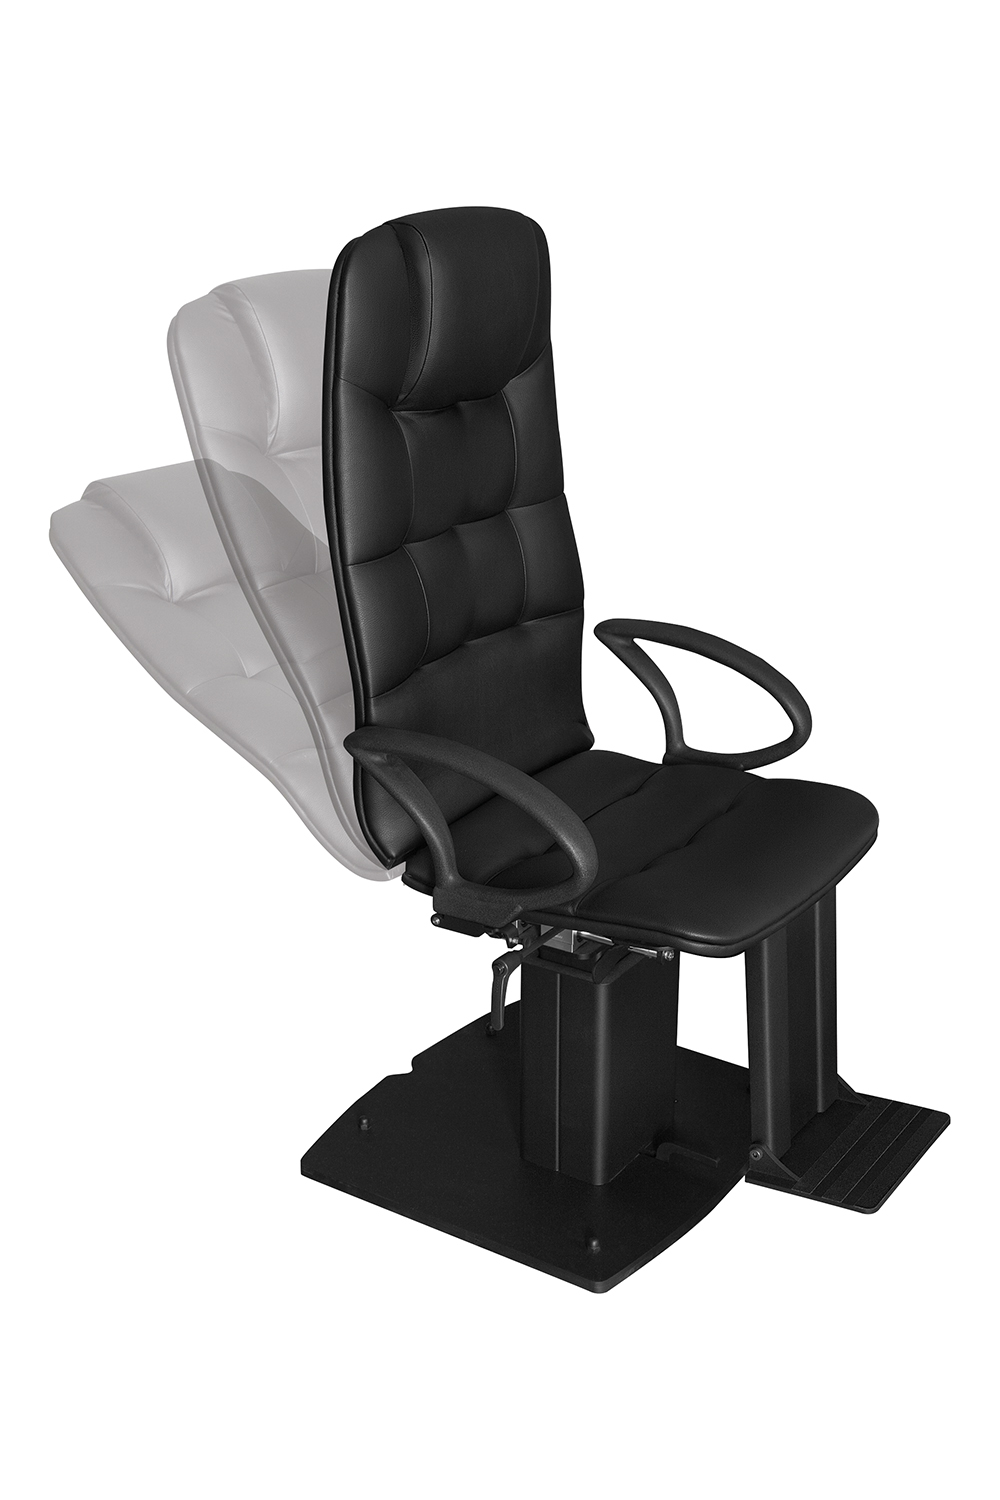 optional-reclinable-chair-motorised-back-forth - BiB Ophthalmic